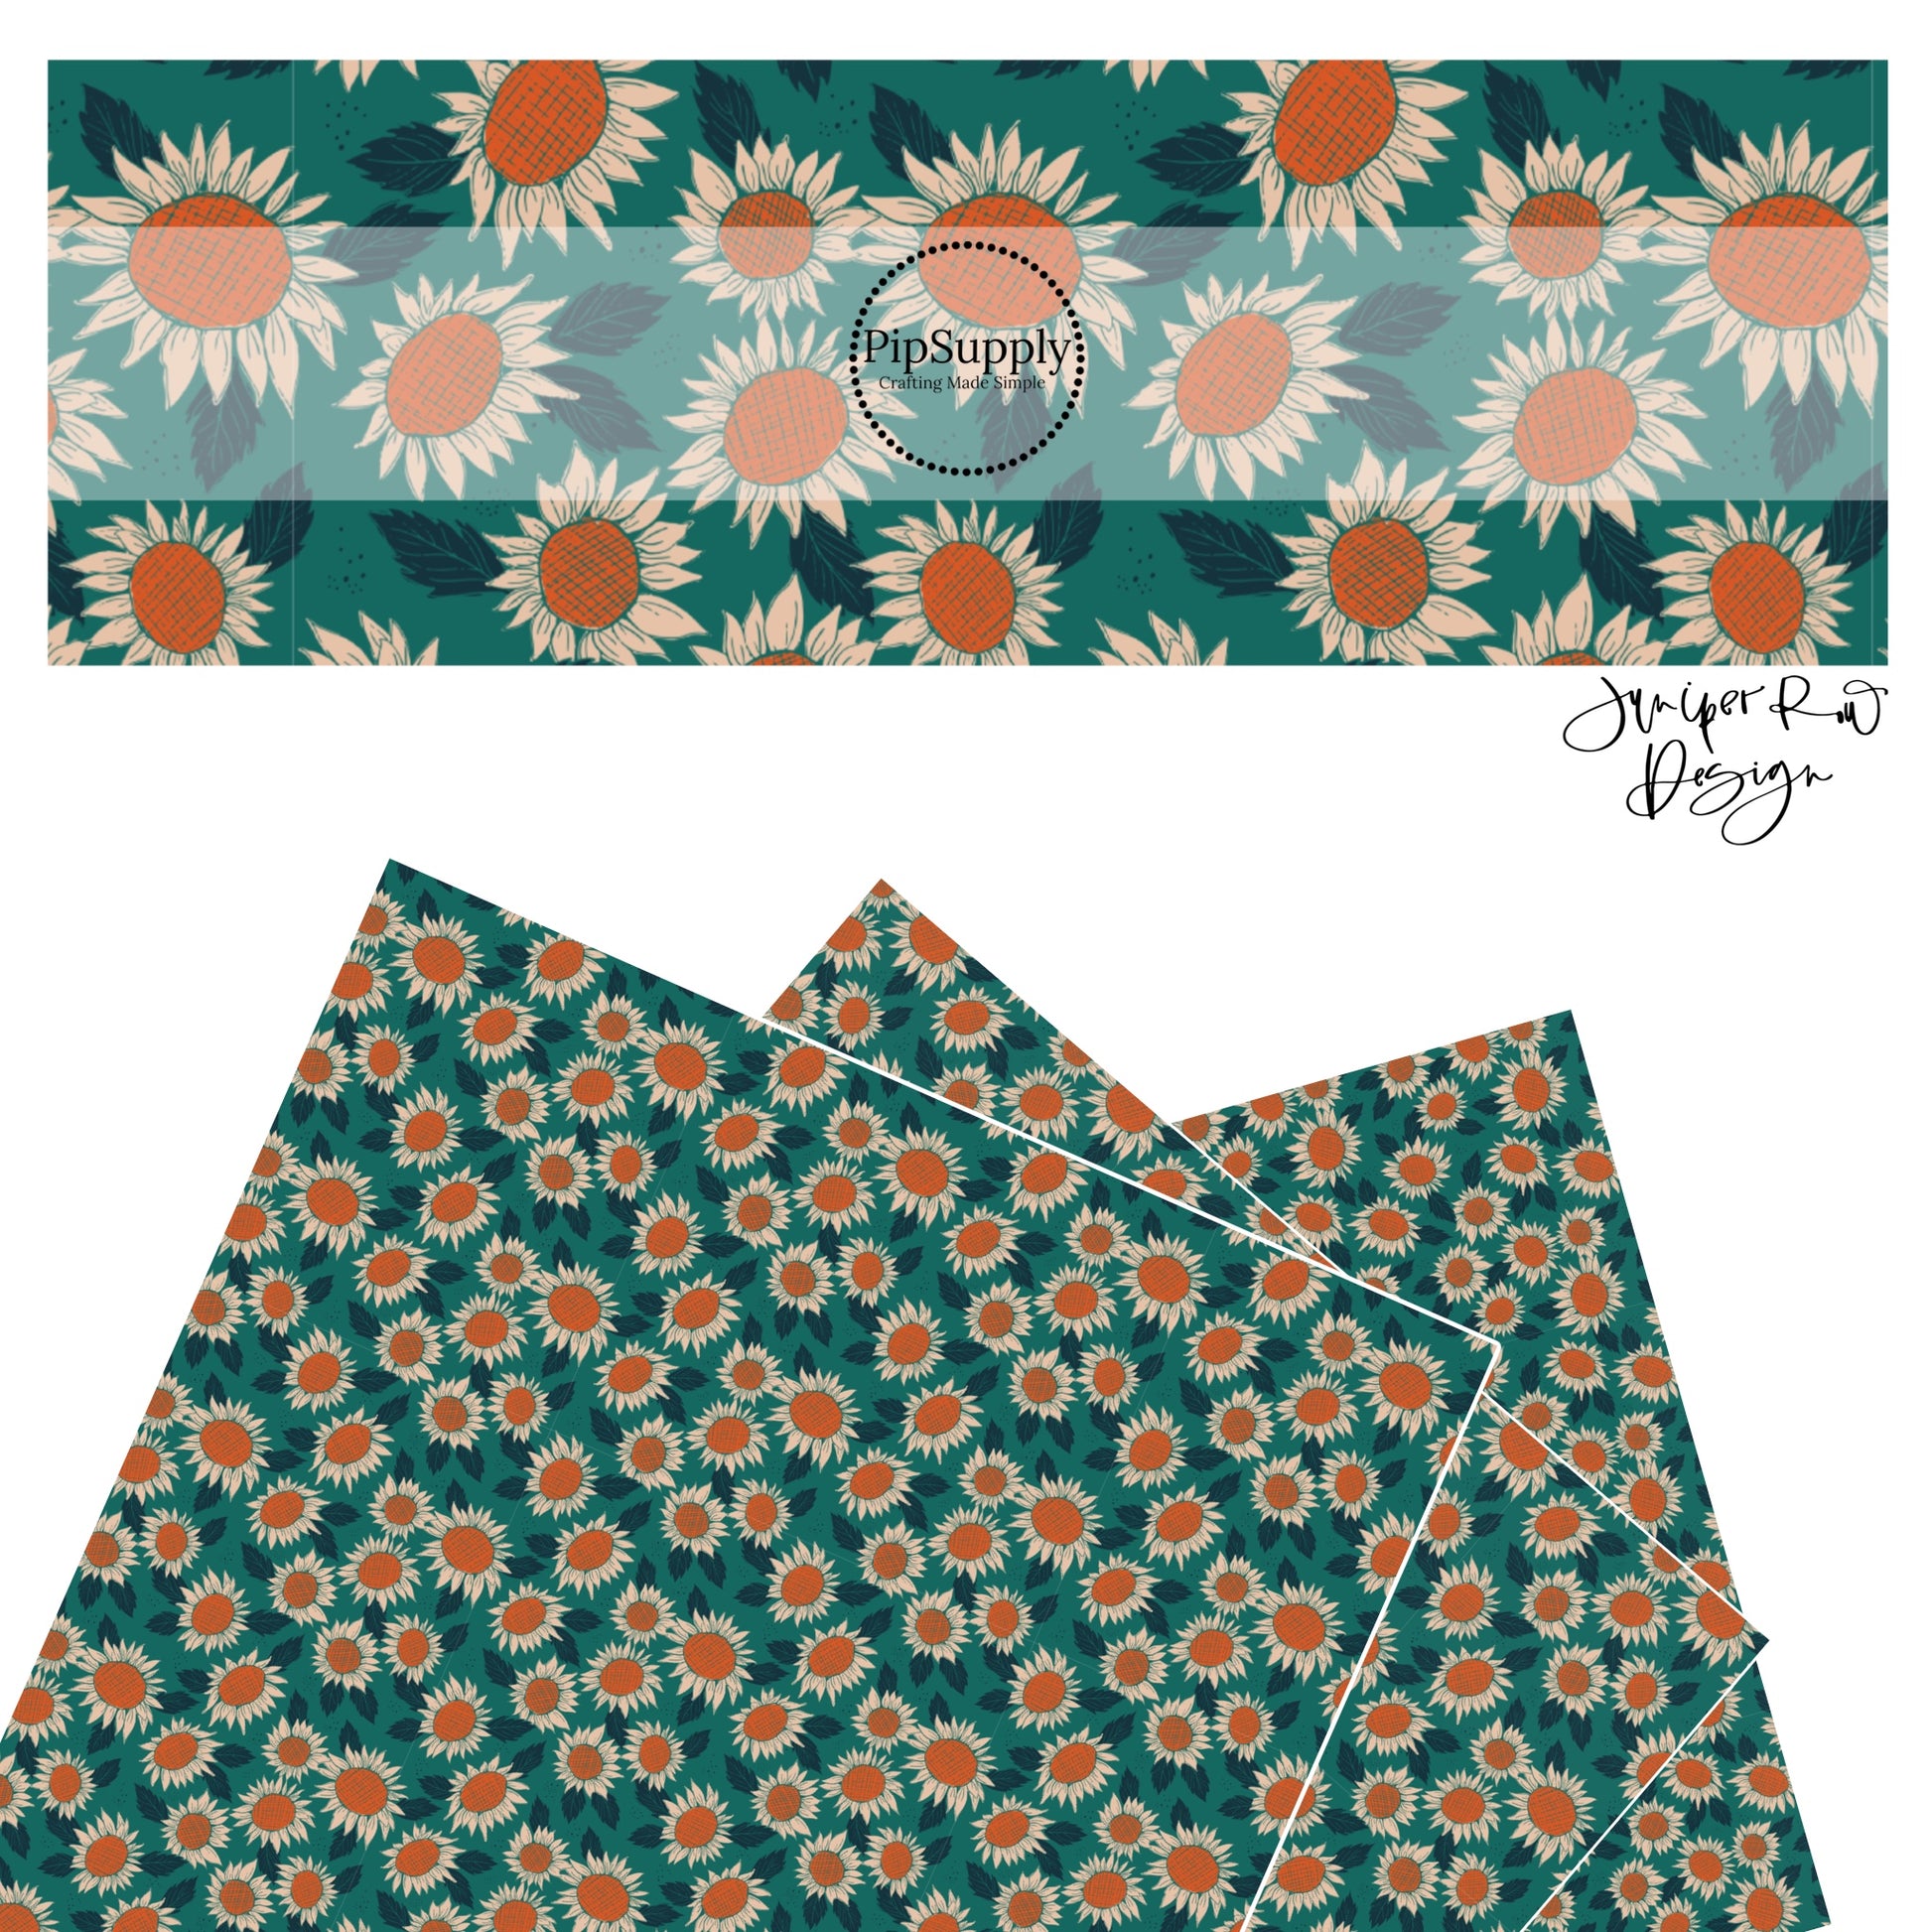 Cream sunflowers on turquoise faux leather sheets